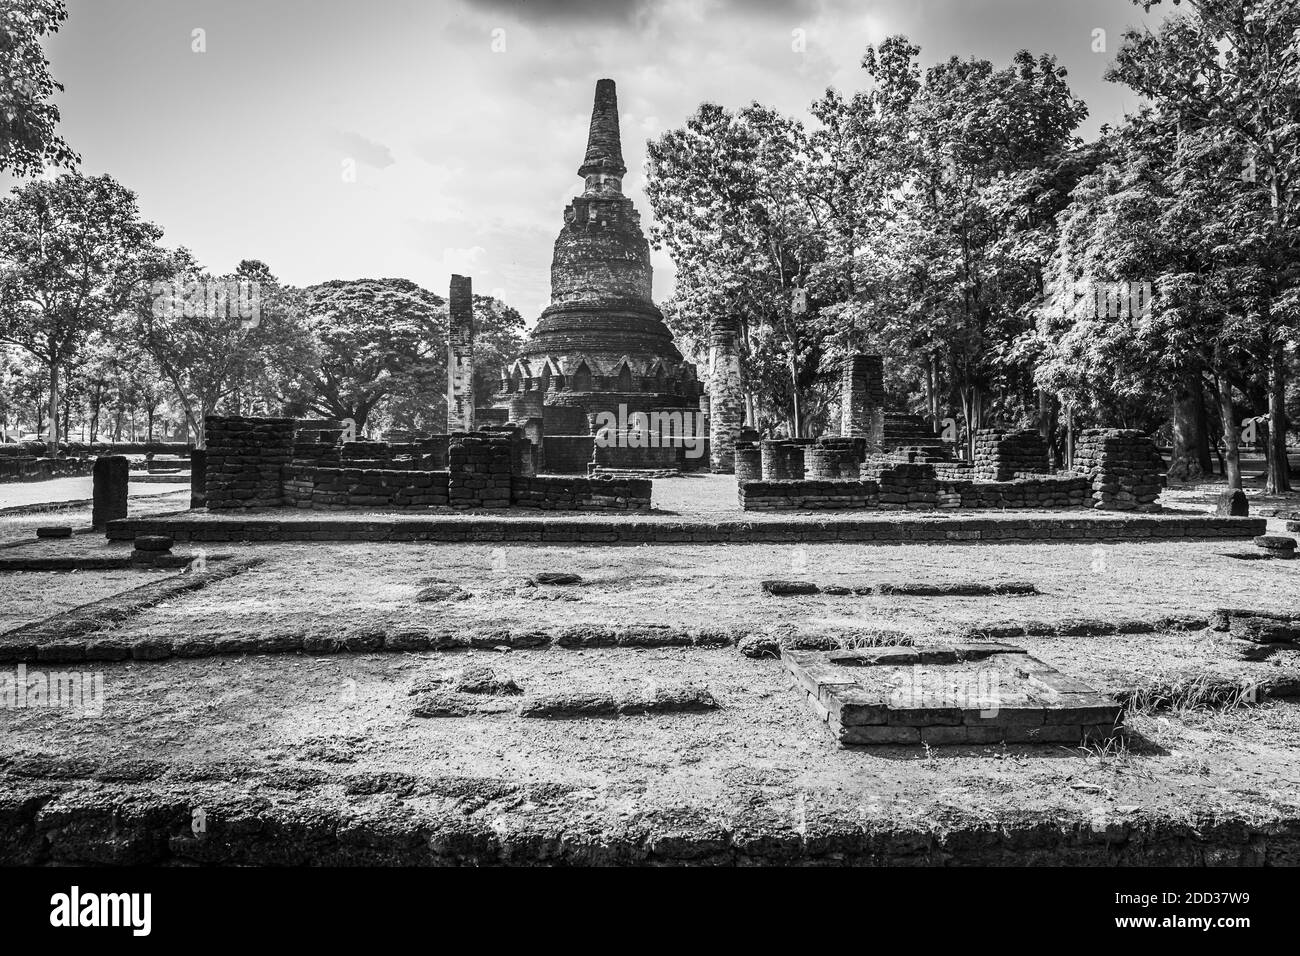 Landmark of old chedi made of ancient bricks in the Kamphaeng Phet Historical Park, Thailand. Black and white Stock Photo